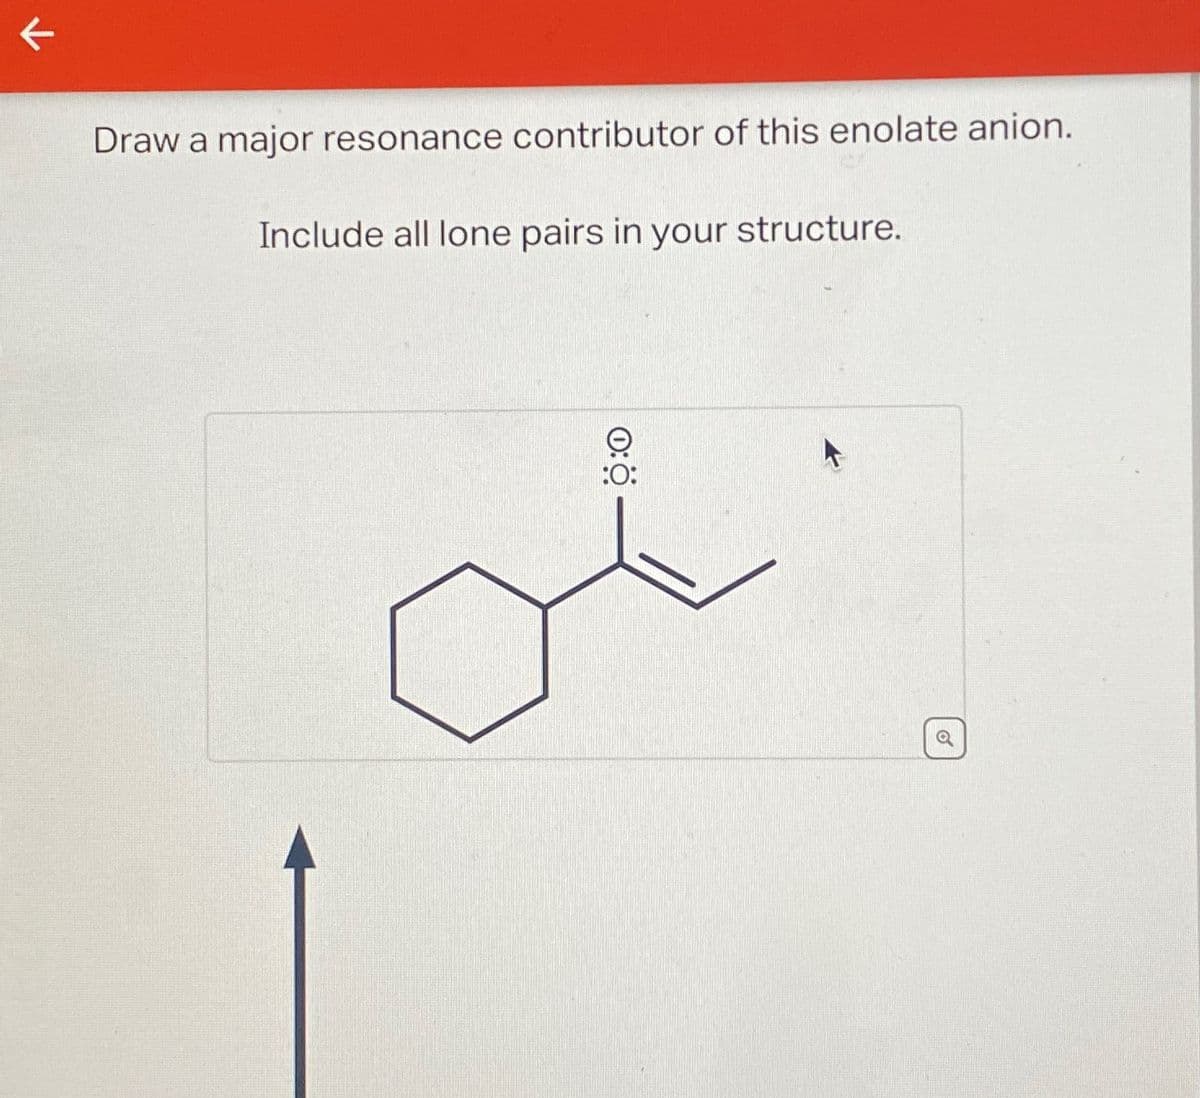 K
Draw a major resonance contributor of this enolate anion.
Include all lone pairs in your structure.
0:0
:0:
6